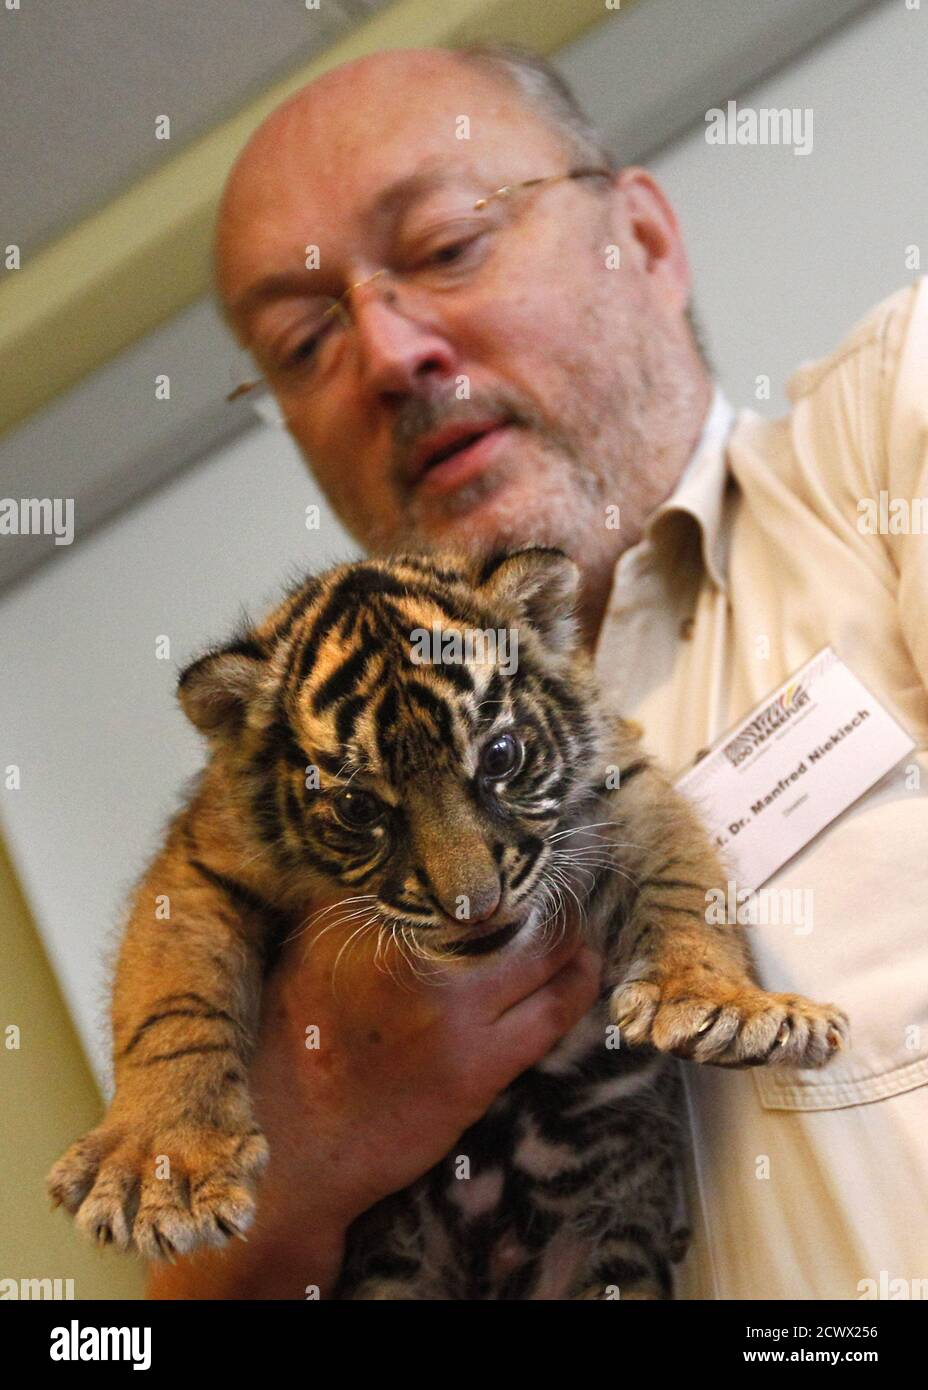 Zoo director Manfred Niekisch holds three weeks old Sumatra tiger cub Daseep during her first public appearance at the zoo in Frankfurt, October 6, 2010. Daseep was surprisingly born by her mother Malea who was supposed to be infertile according to the zoo's vet.   REUTERS/Kai Pfaffenbach  (GERMANY - Tags: ANIMALS ENVIRONMENT) Stock Photo